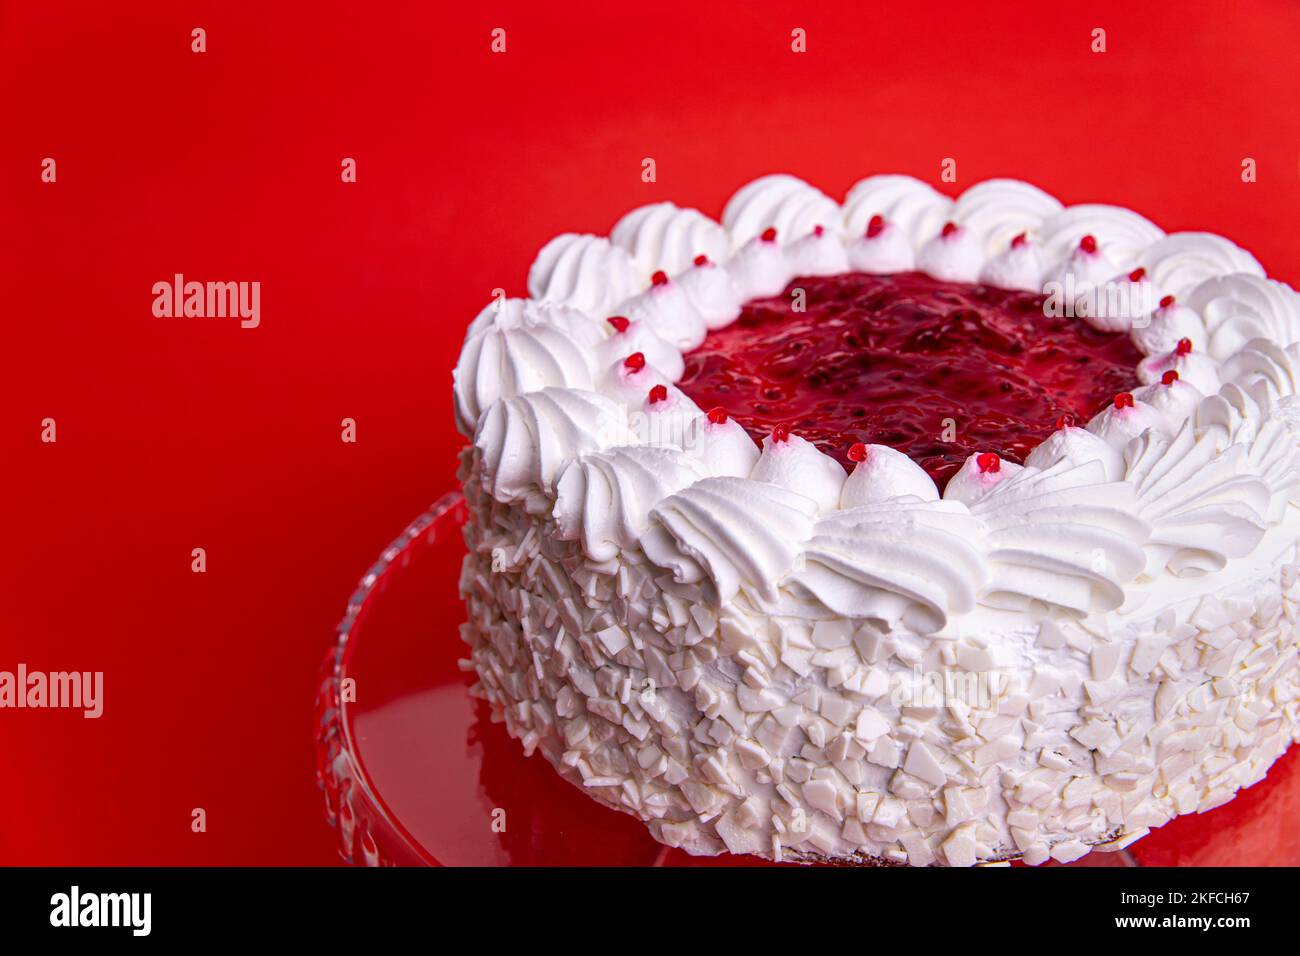 Cake with cherry isolated on white background. Piece of cheesecake with red fruits. White birthday cake on a red background. Cake with cherry jam and Stock Photo